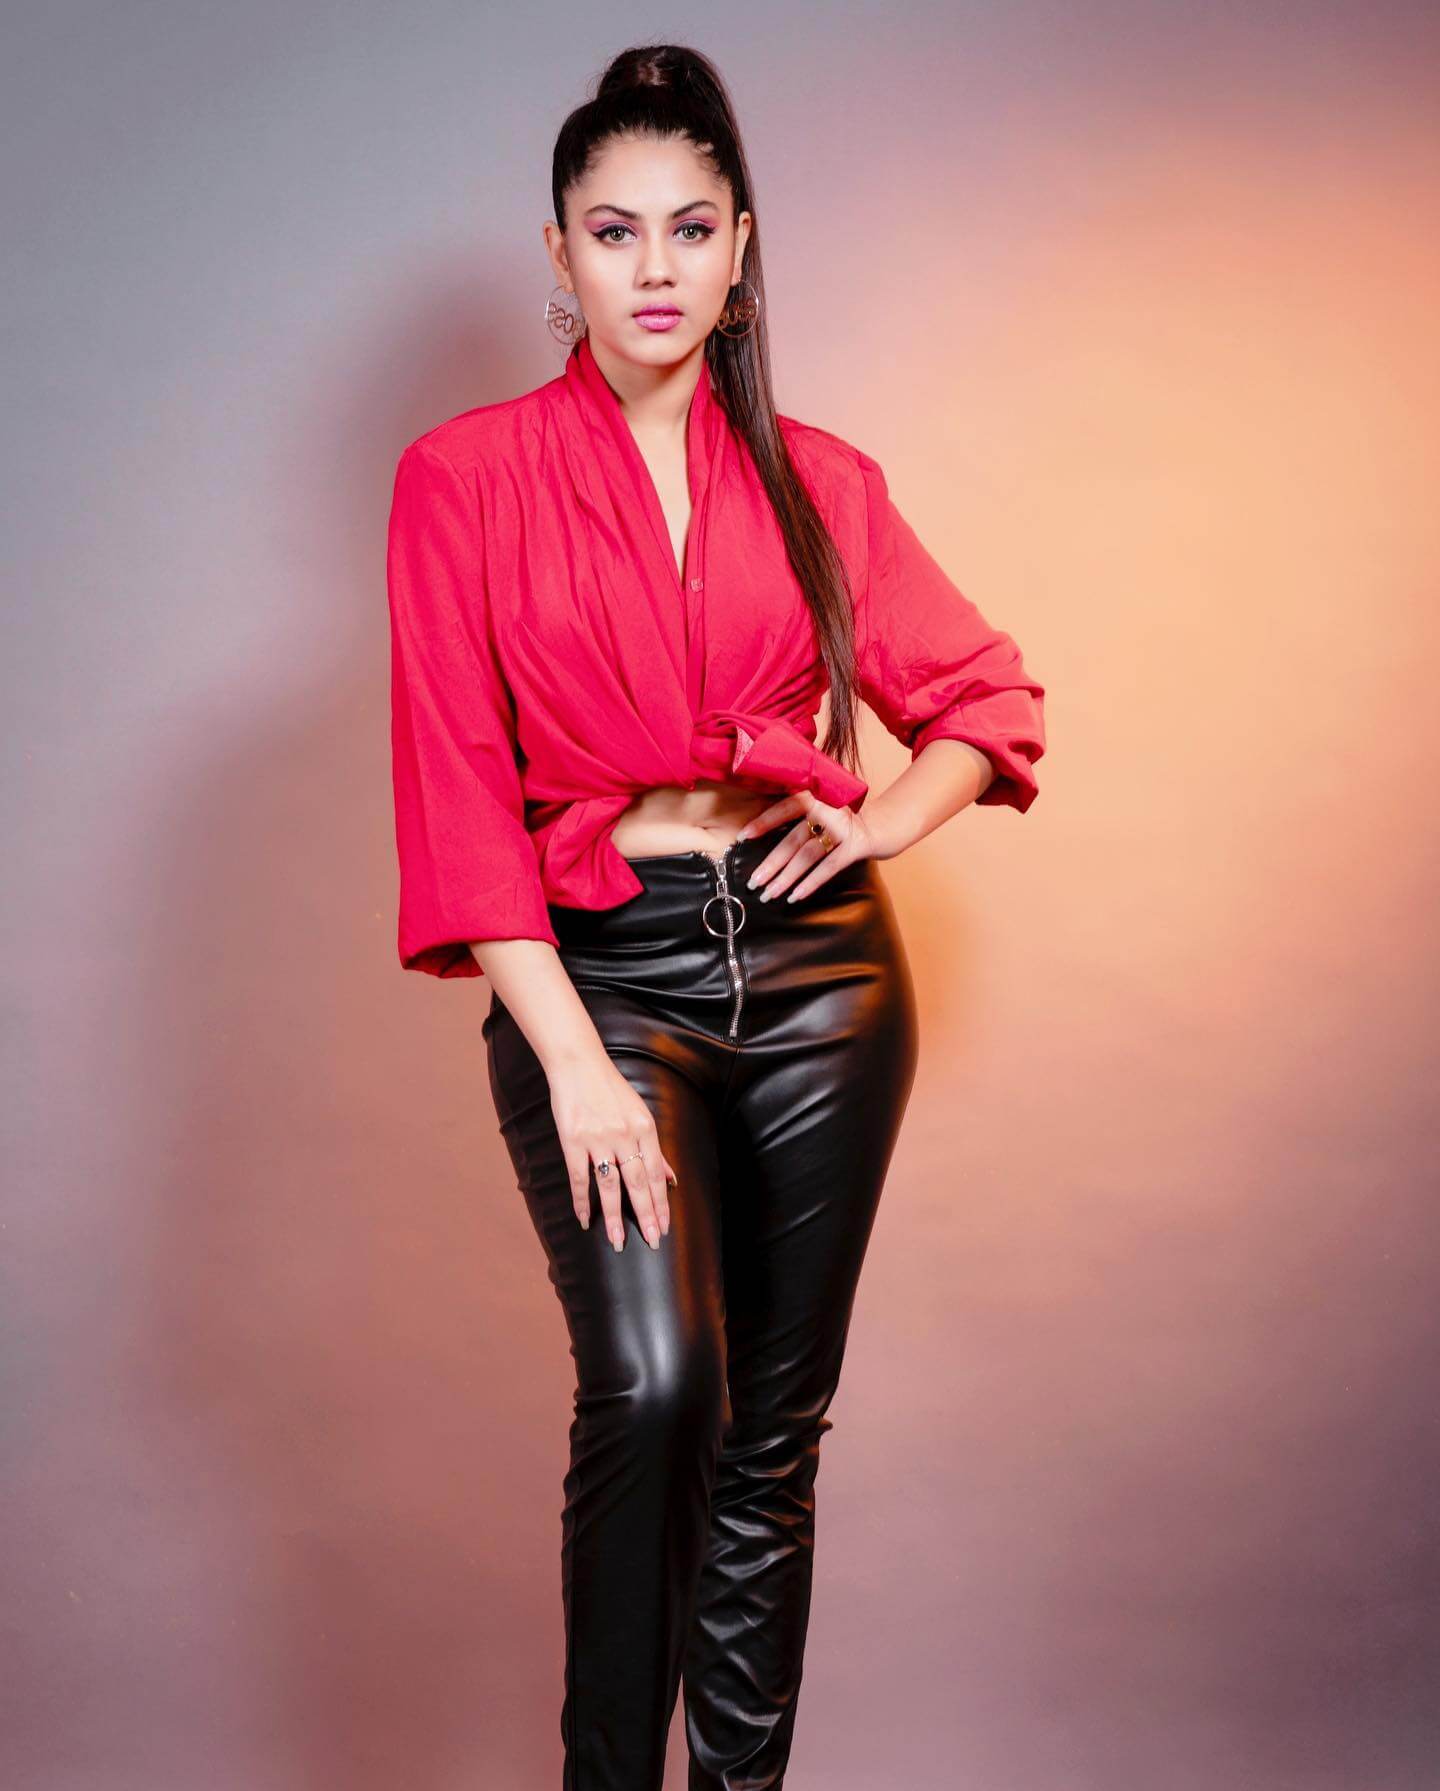 Sexy Rittika Sen Sleek & Sassy Look In Pink Crop Tie-Up Shirt With Sexy Black Leather Pants Outfits Dresses